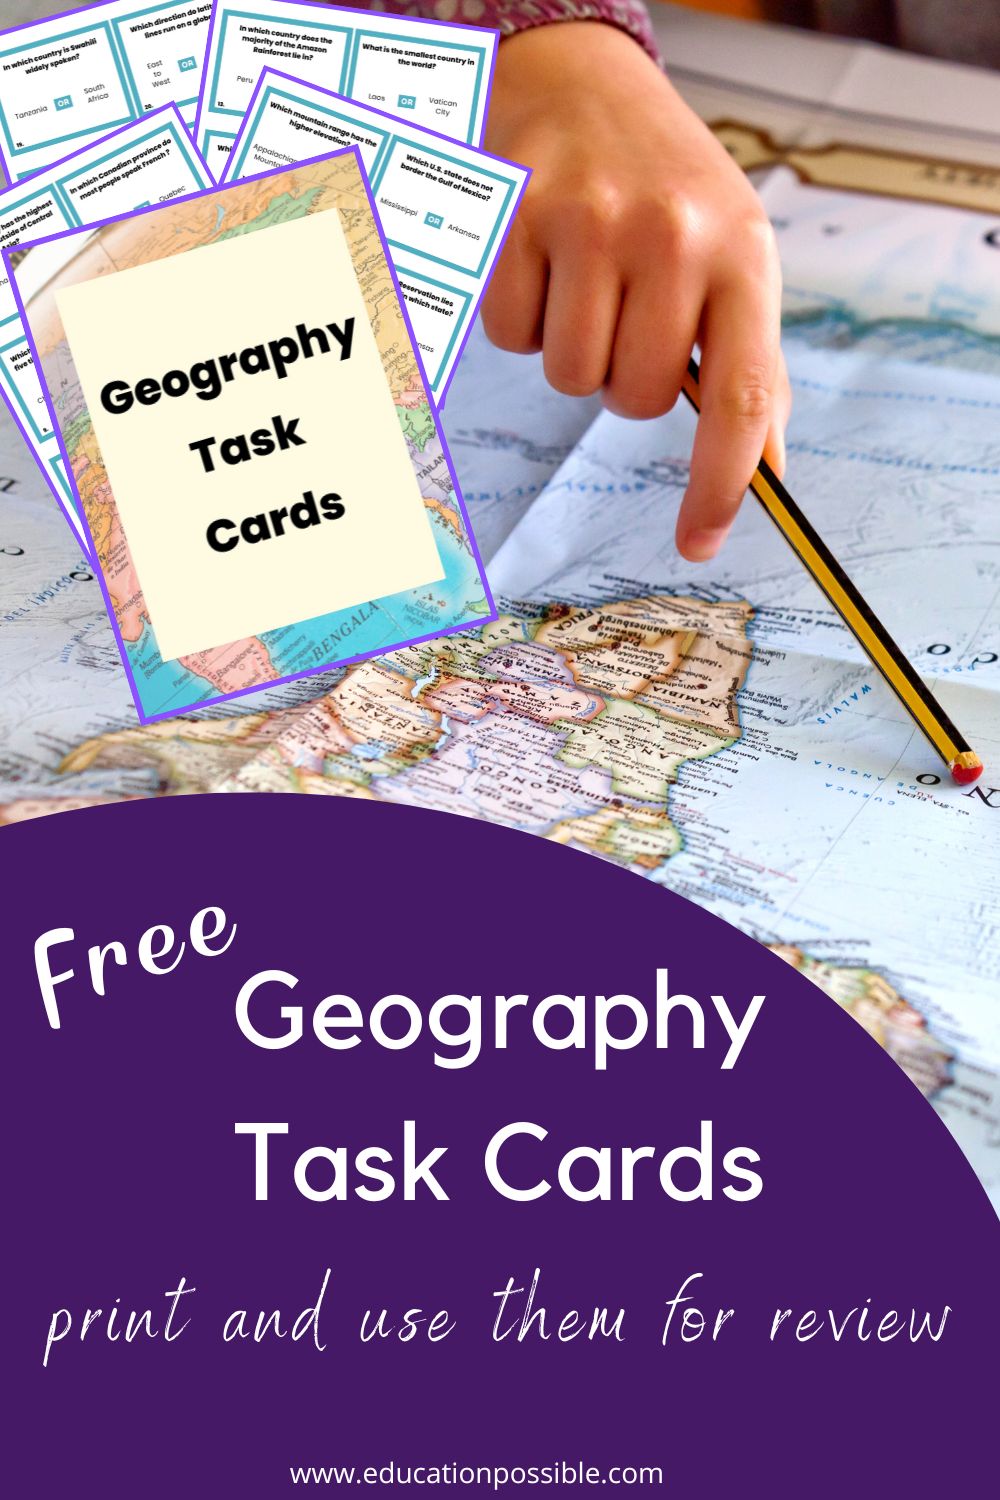 Hand holding a pencil pointing to a location on a world map on the table. Images of printable geography task cards.